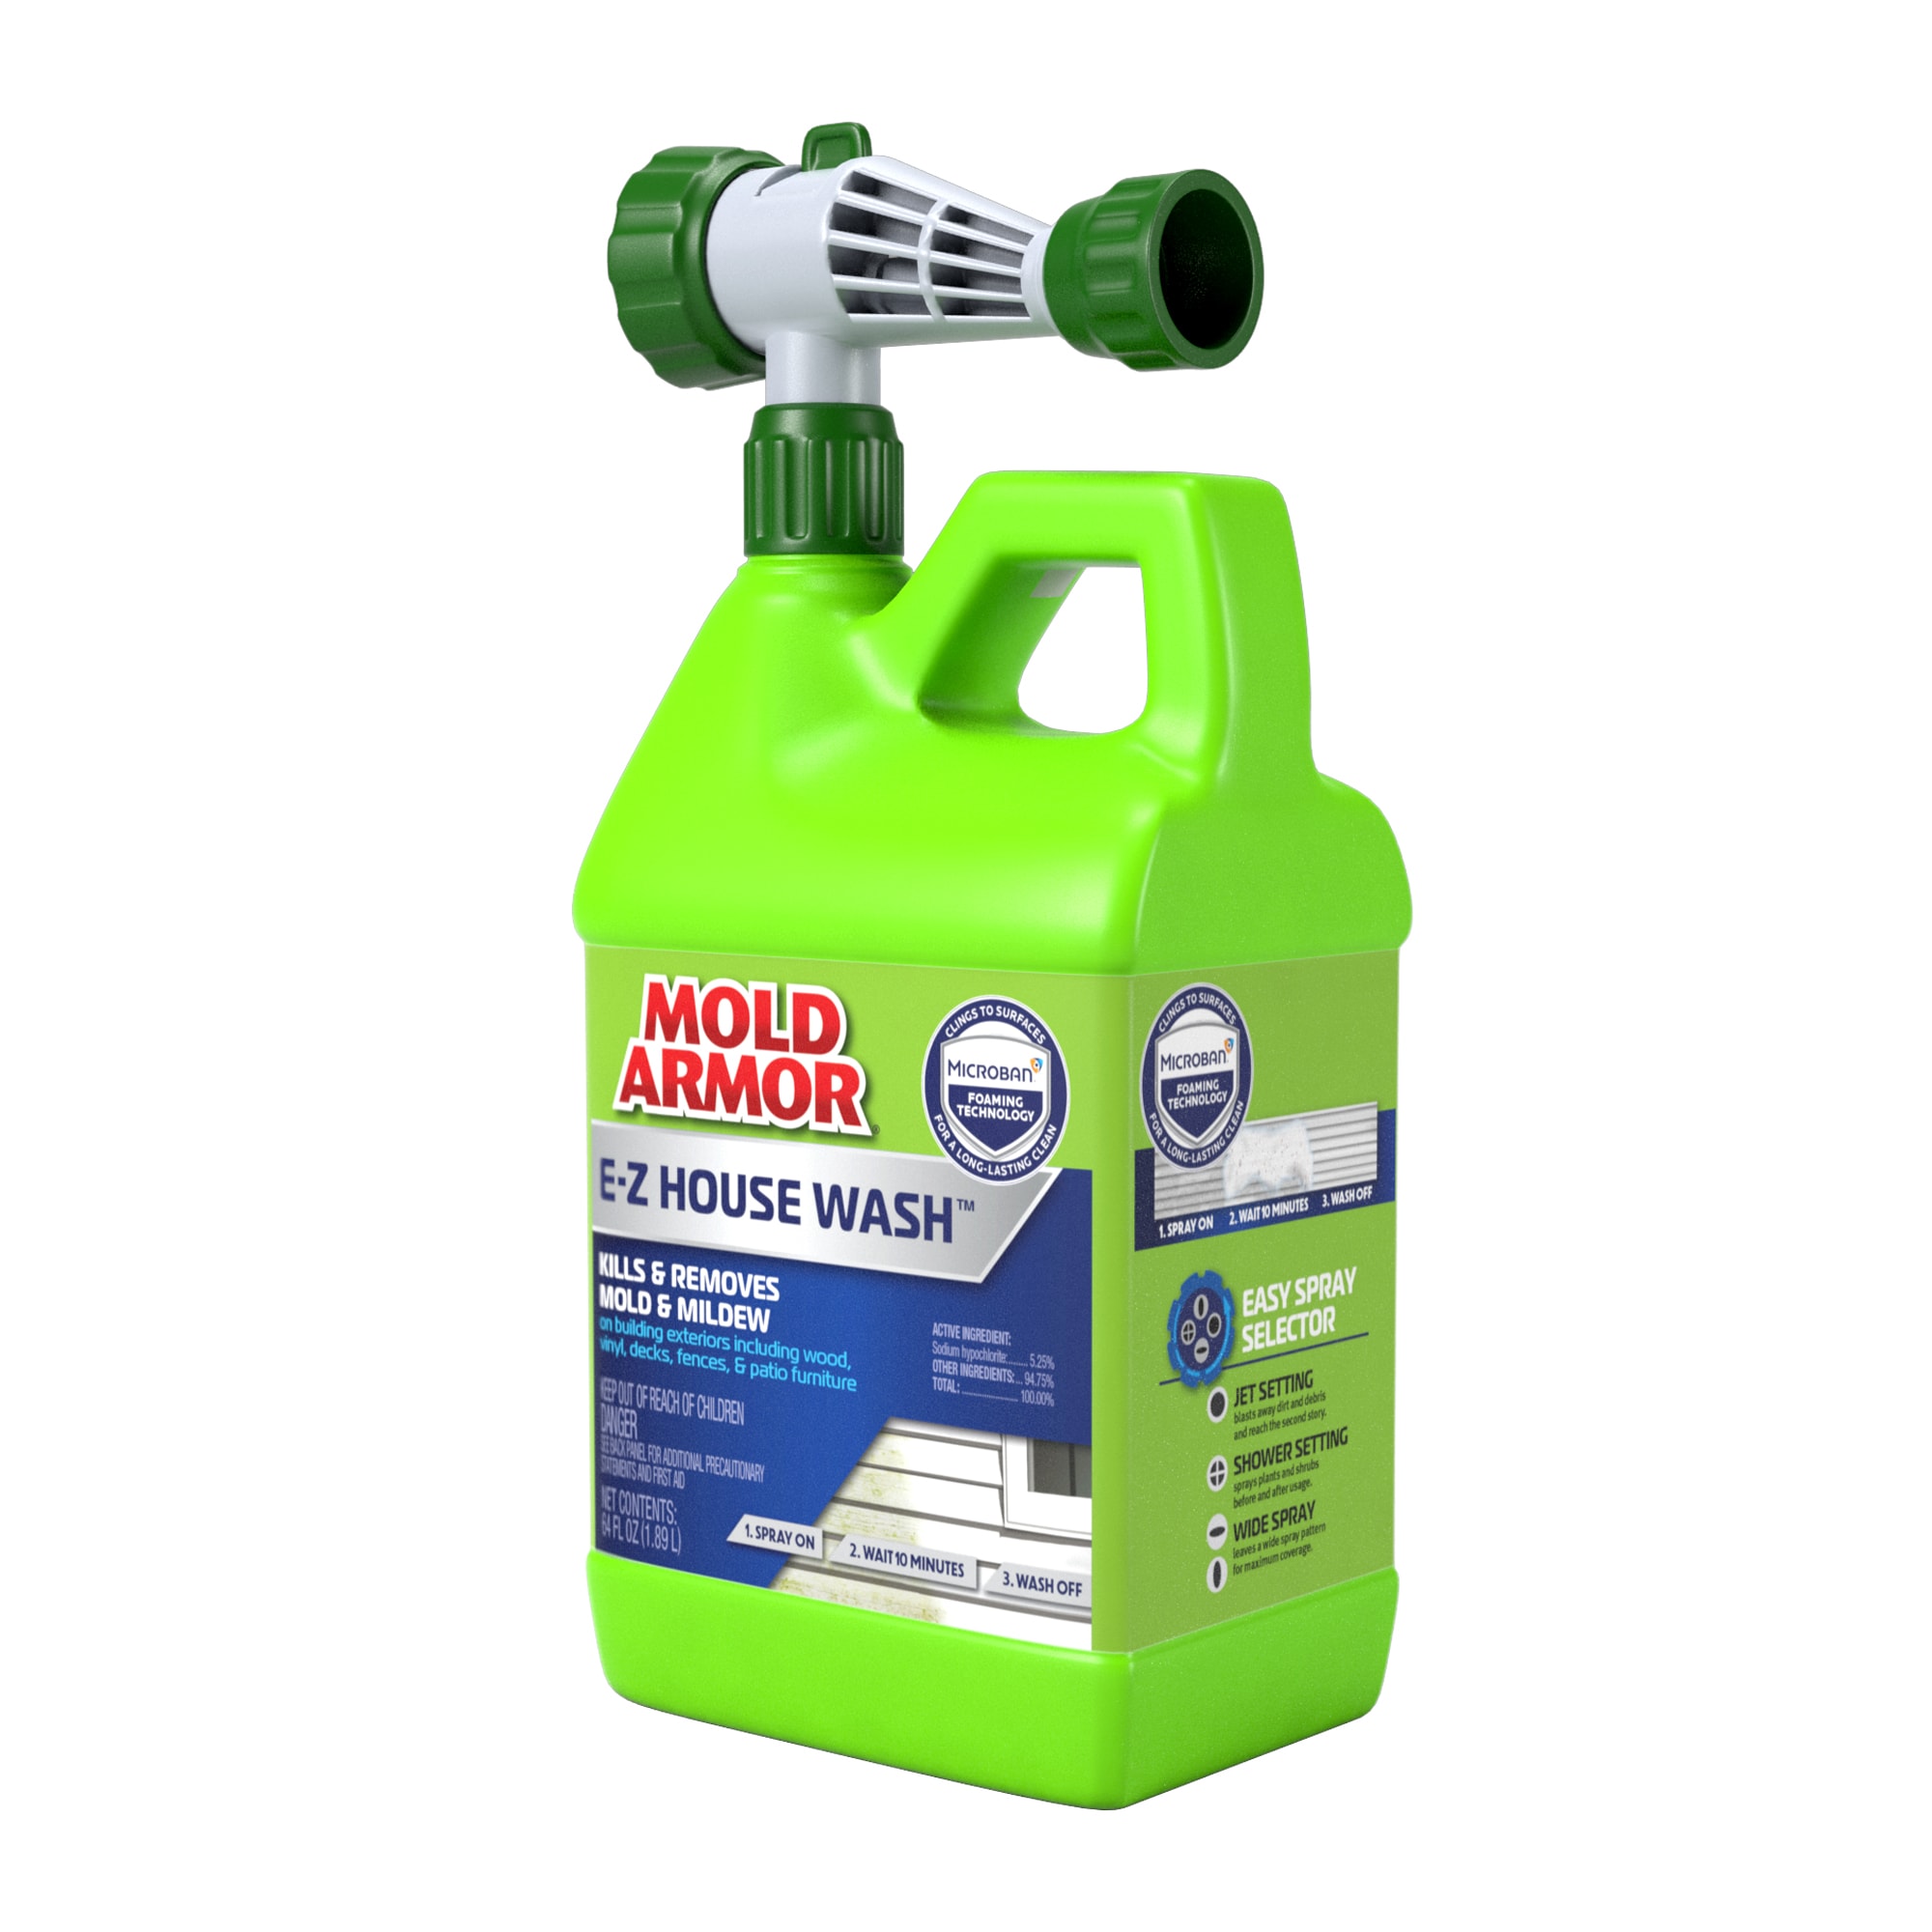 Mold Armor E-Z House Wash Review + Cost Savings HACK 